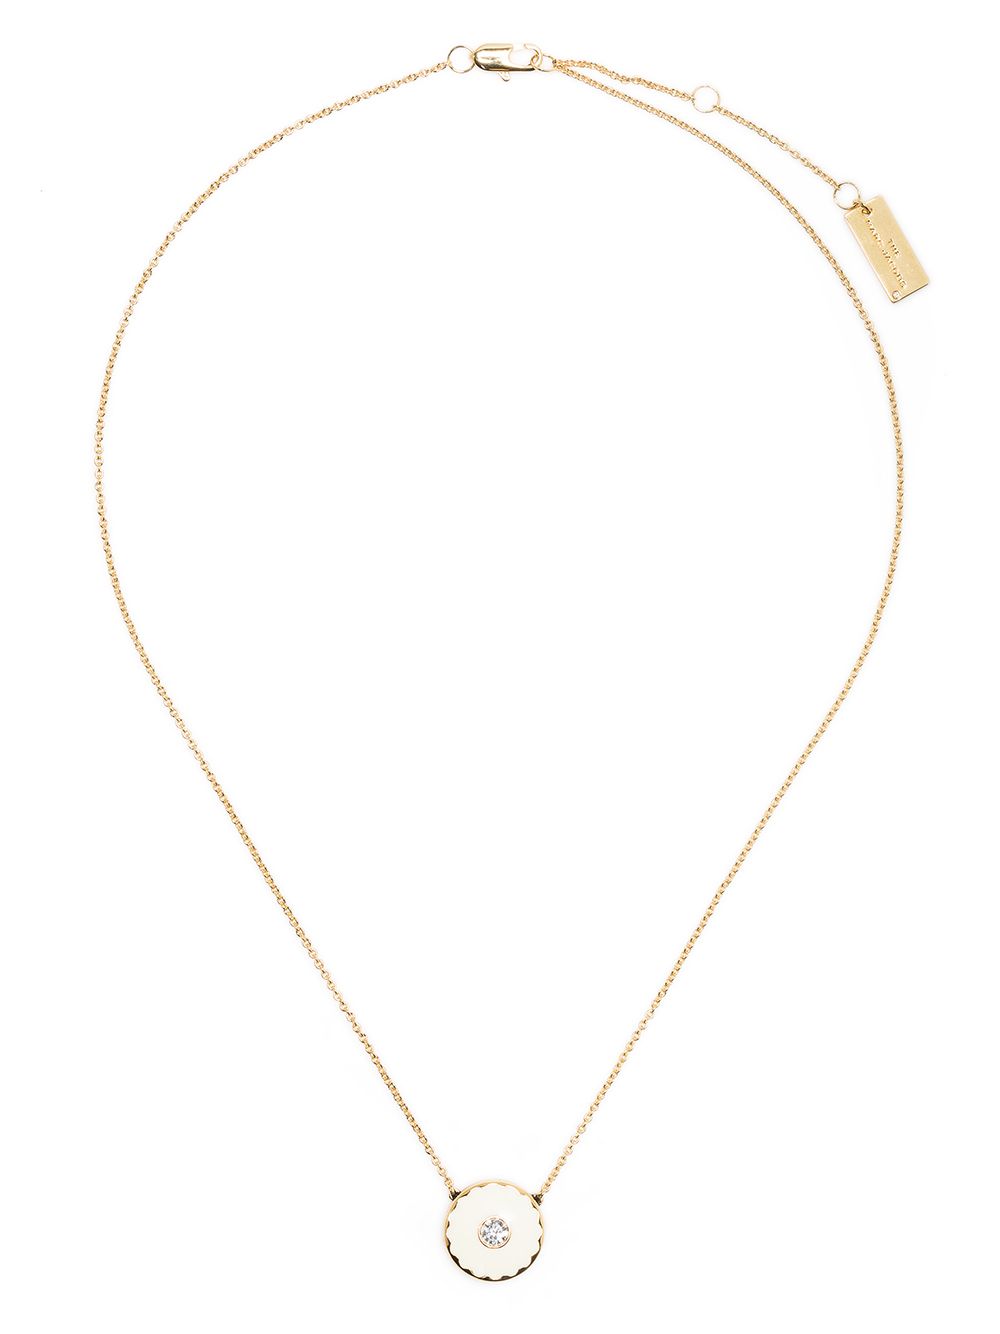 Marc Jacobs Medallion Chain Necklace - Farfetch